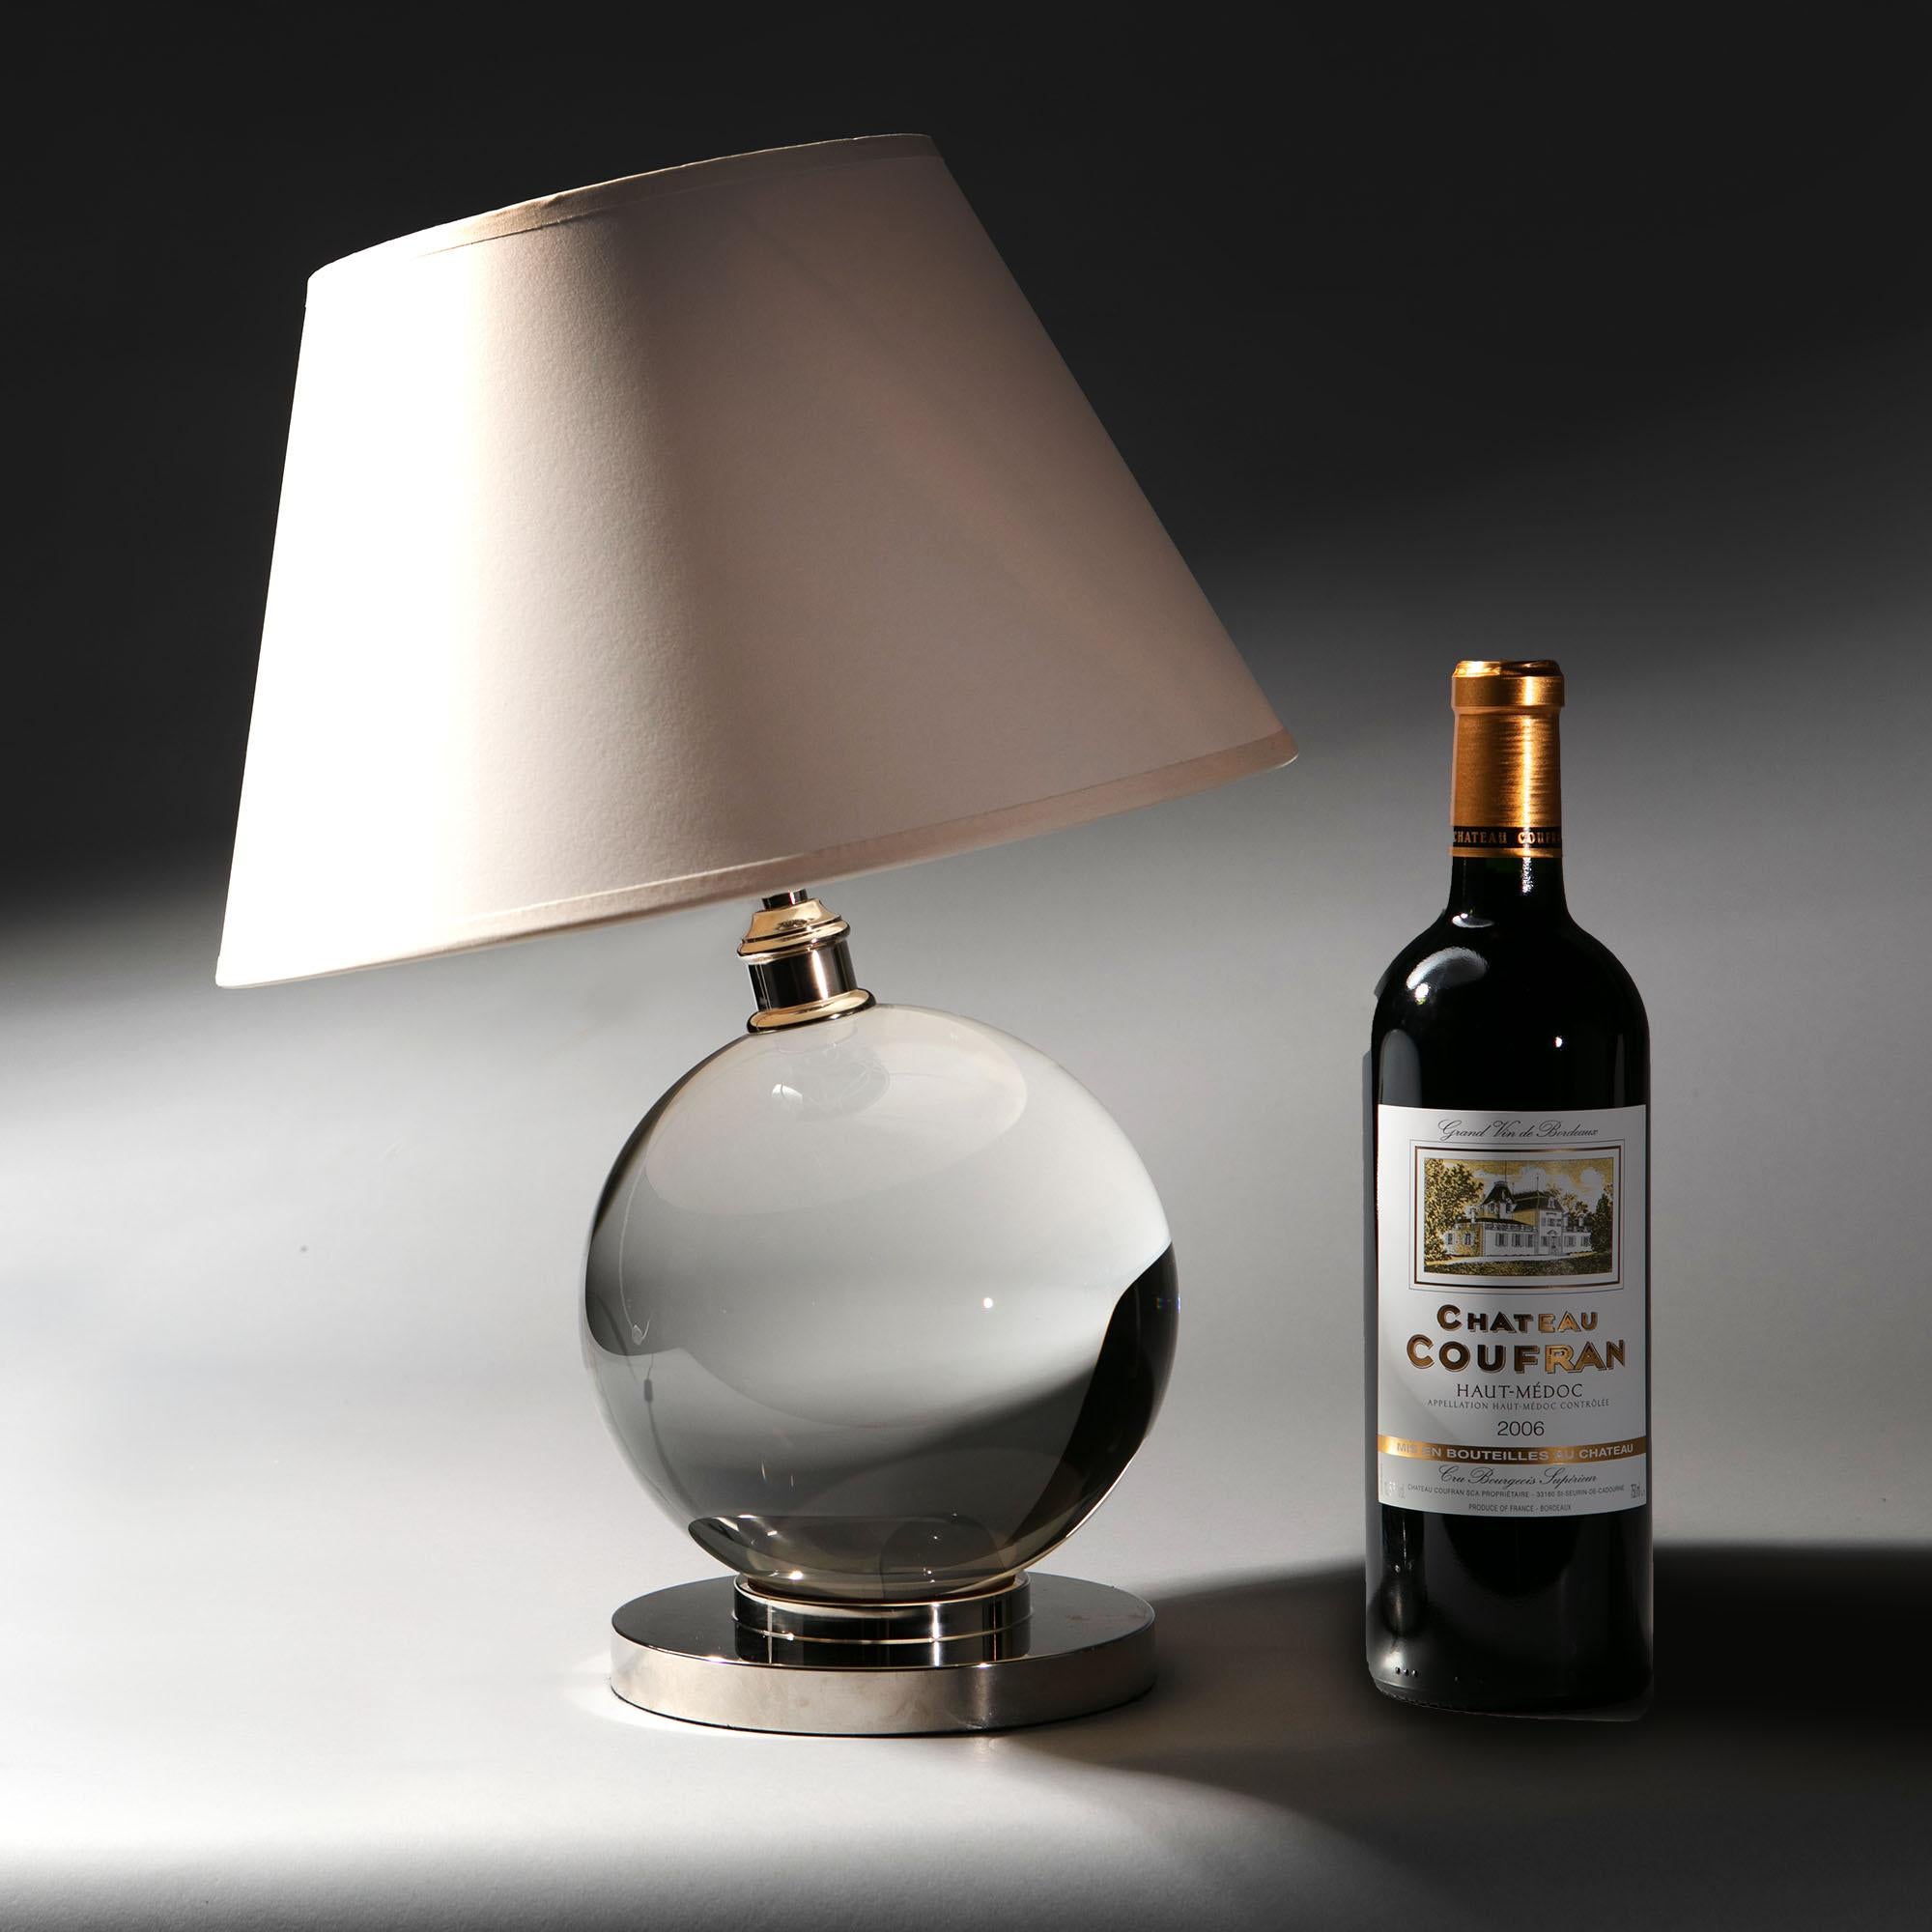 A giant crystal ball lamp resting on a circular silver base, after a design by Jacques Adnet.

Please note: lampshade not included. Wine bottle for scale.

Currently wired for the UK.